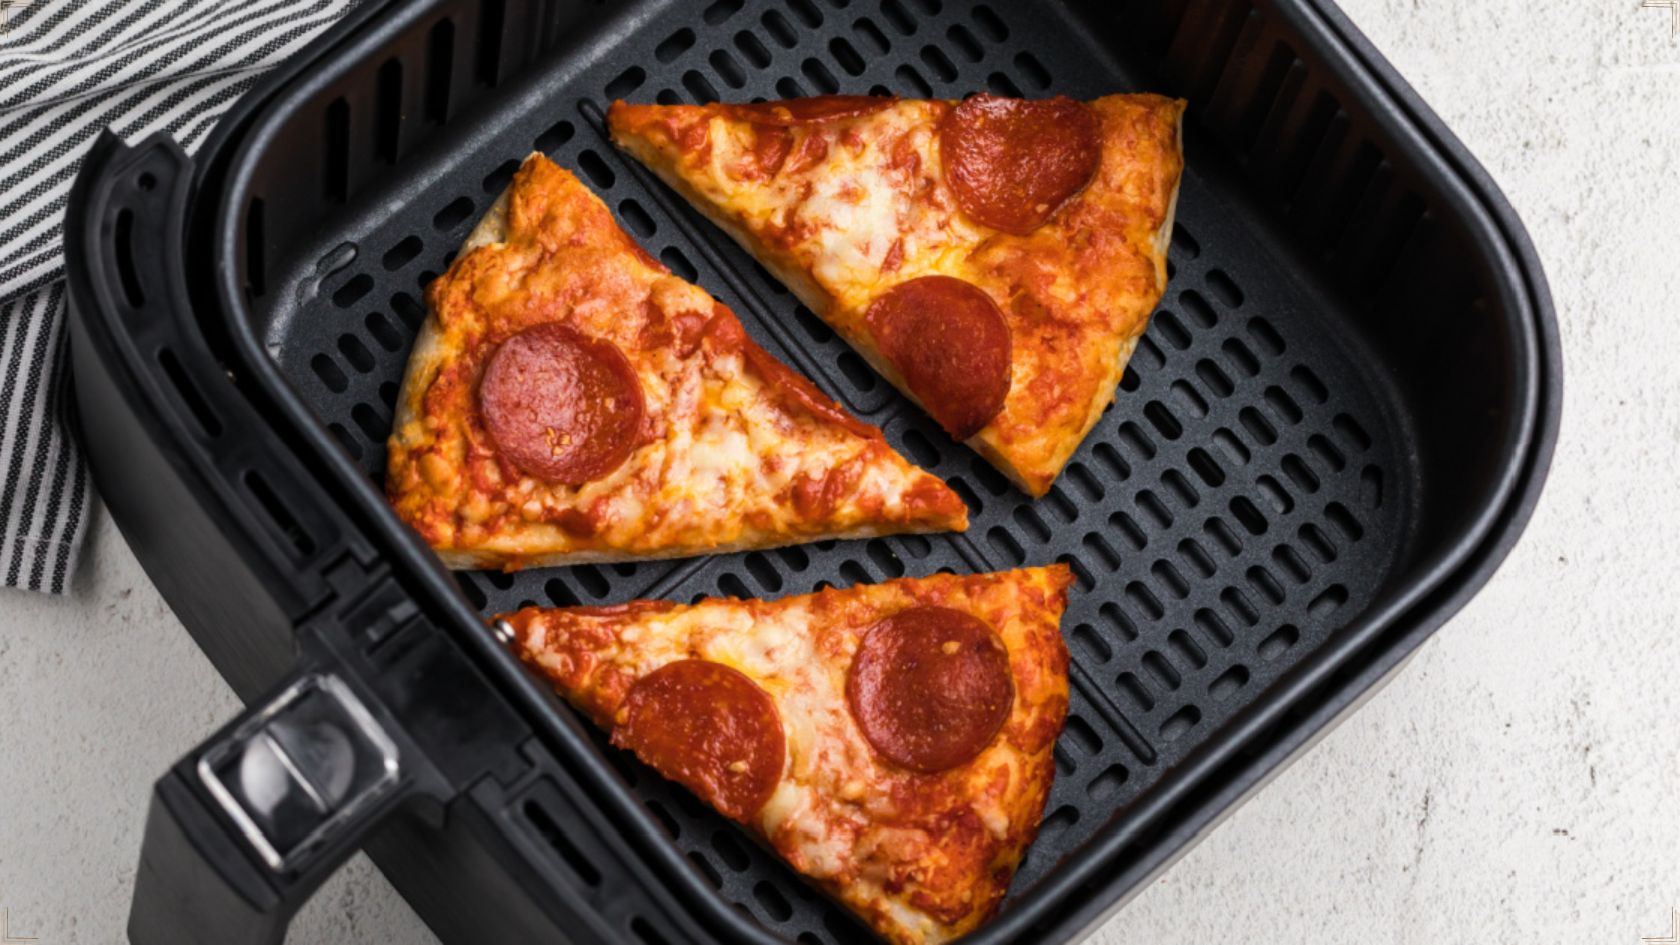 Warming up pizza in air fryer